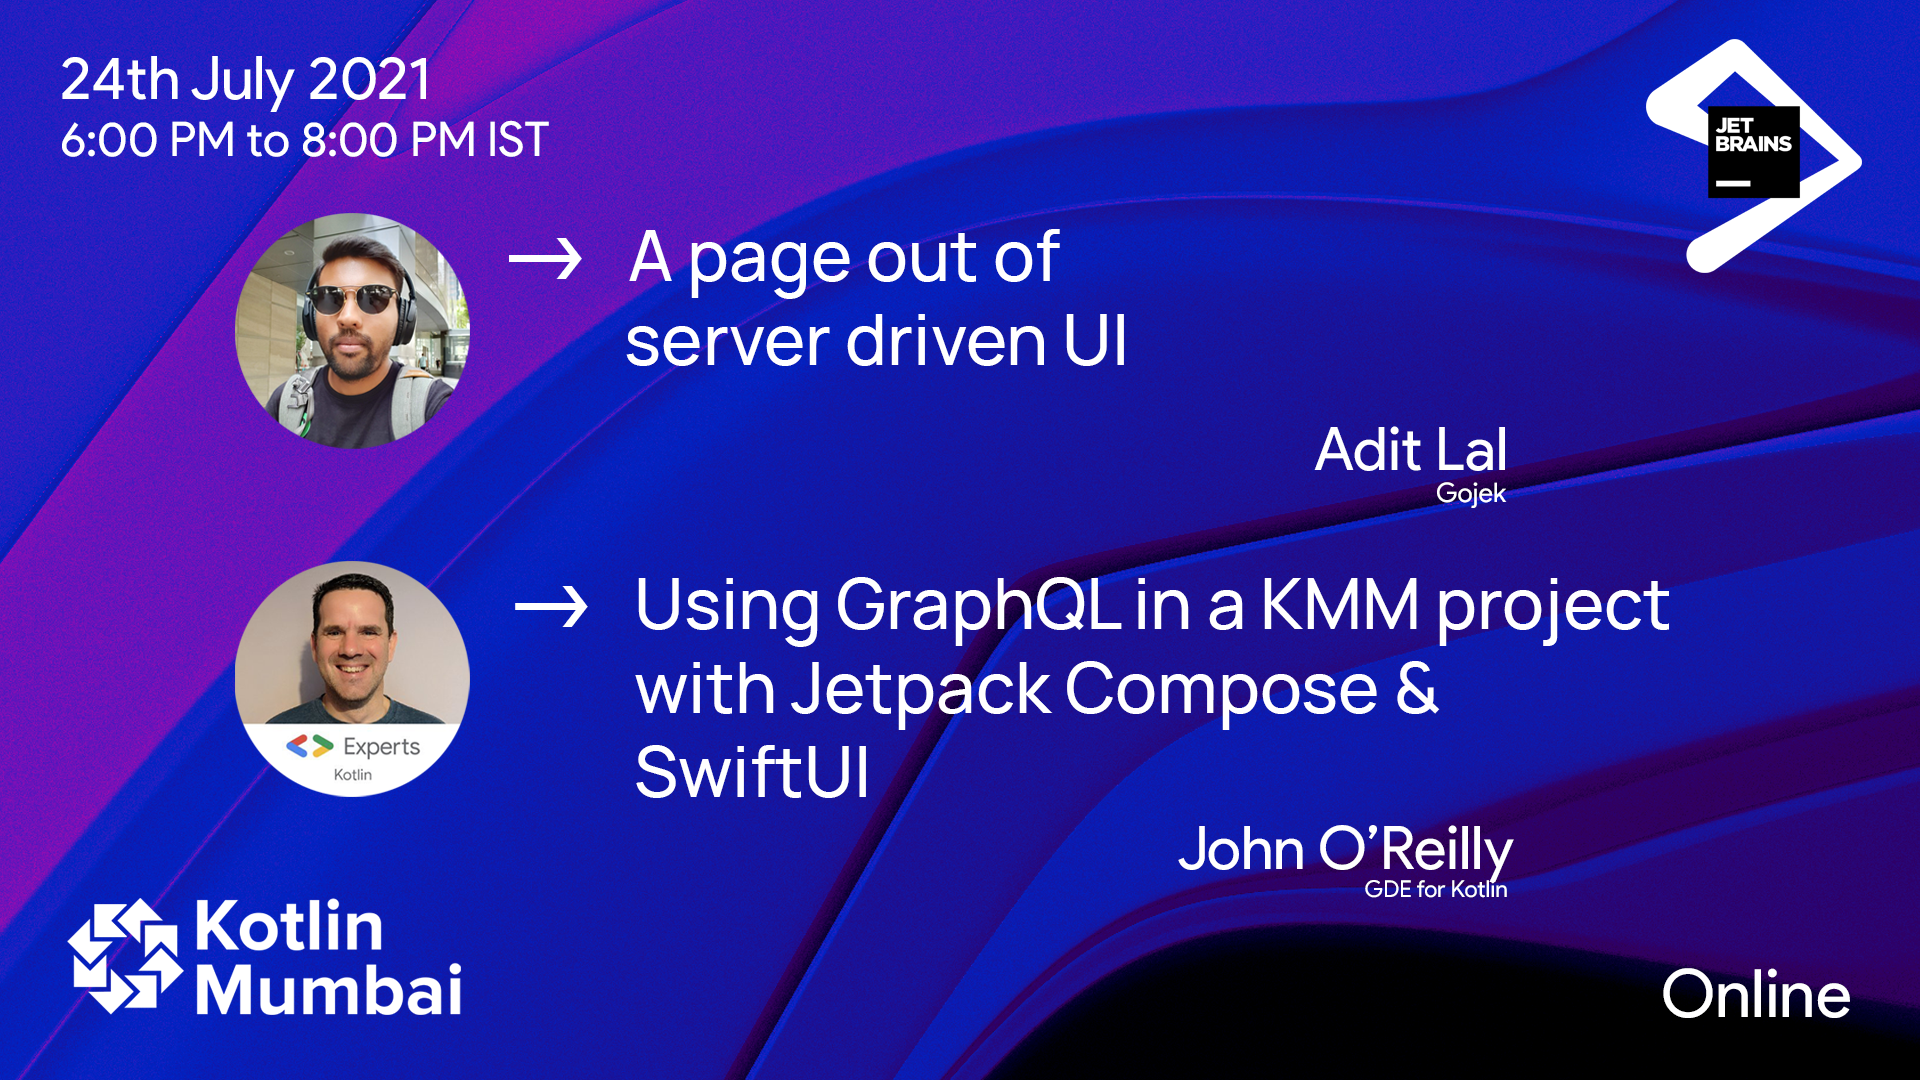 Build multiplatform projects with SwiftUI and compose and learn the art of server driven UI on Android with John Oreilly and Adit Lal